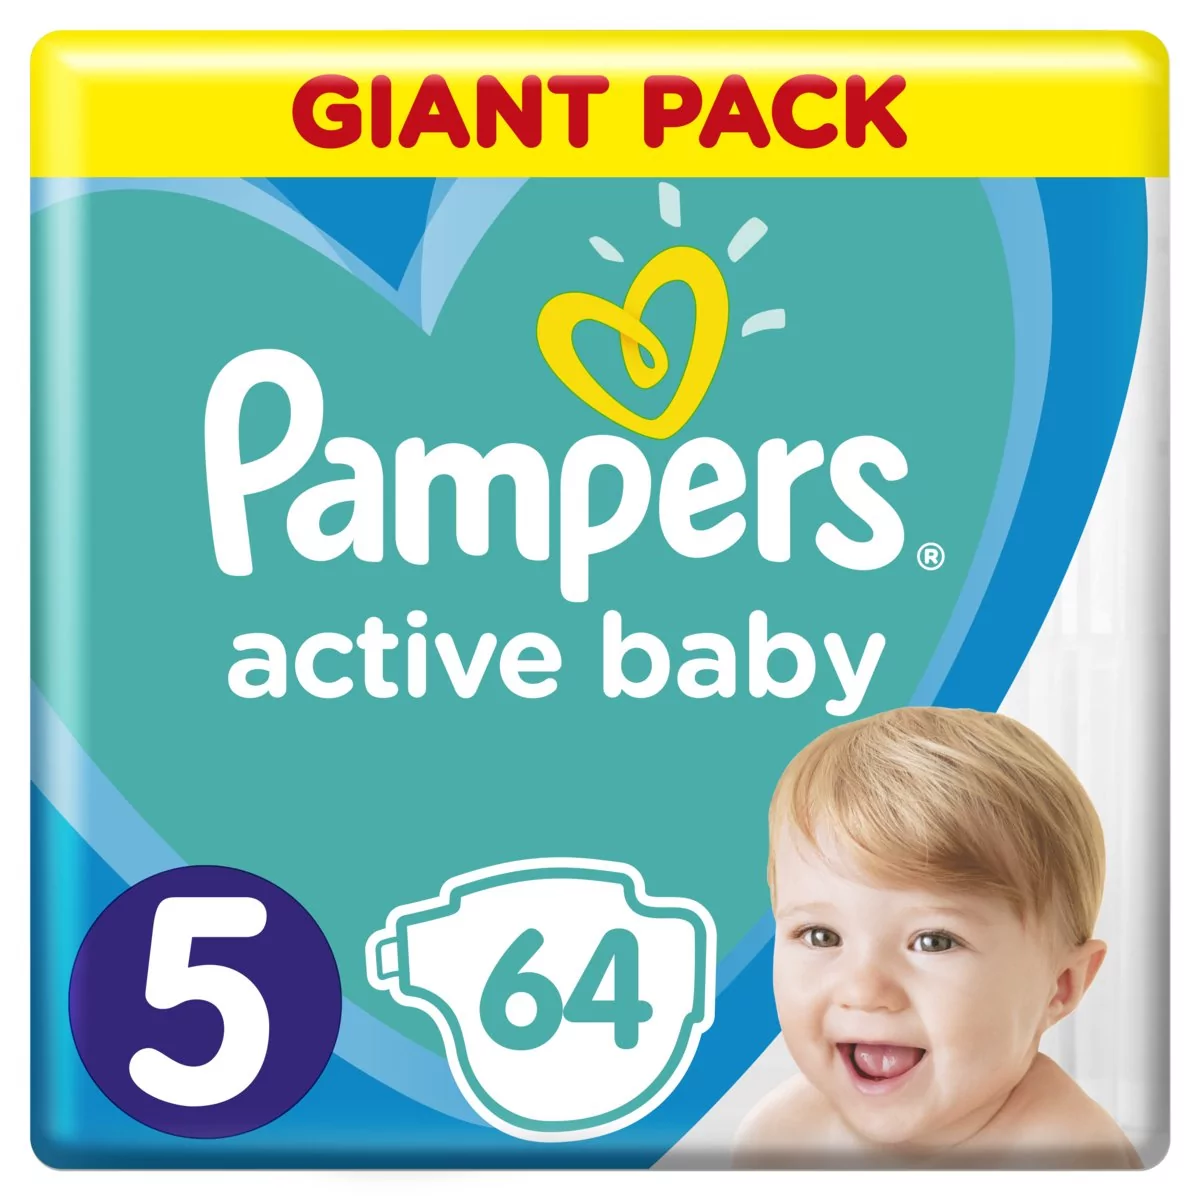 pampers new baby-dry pieluchy nr 1